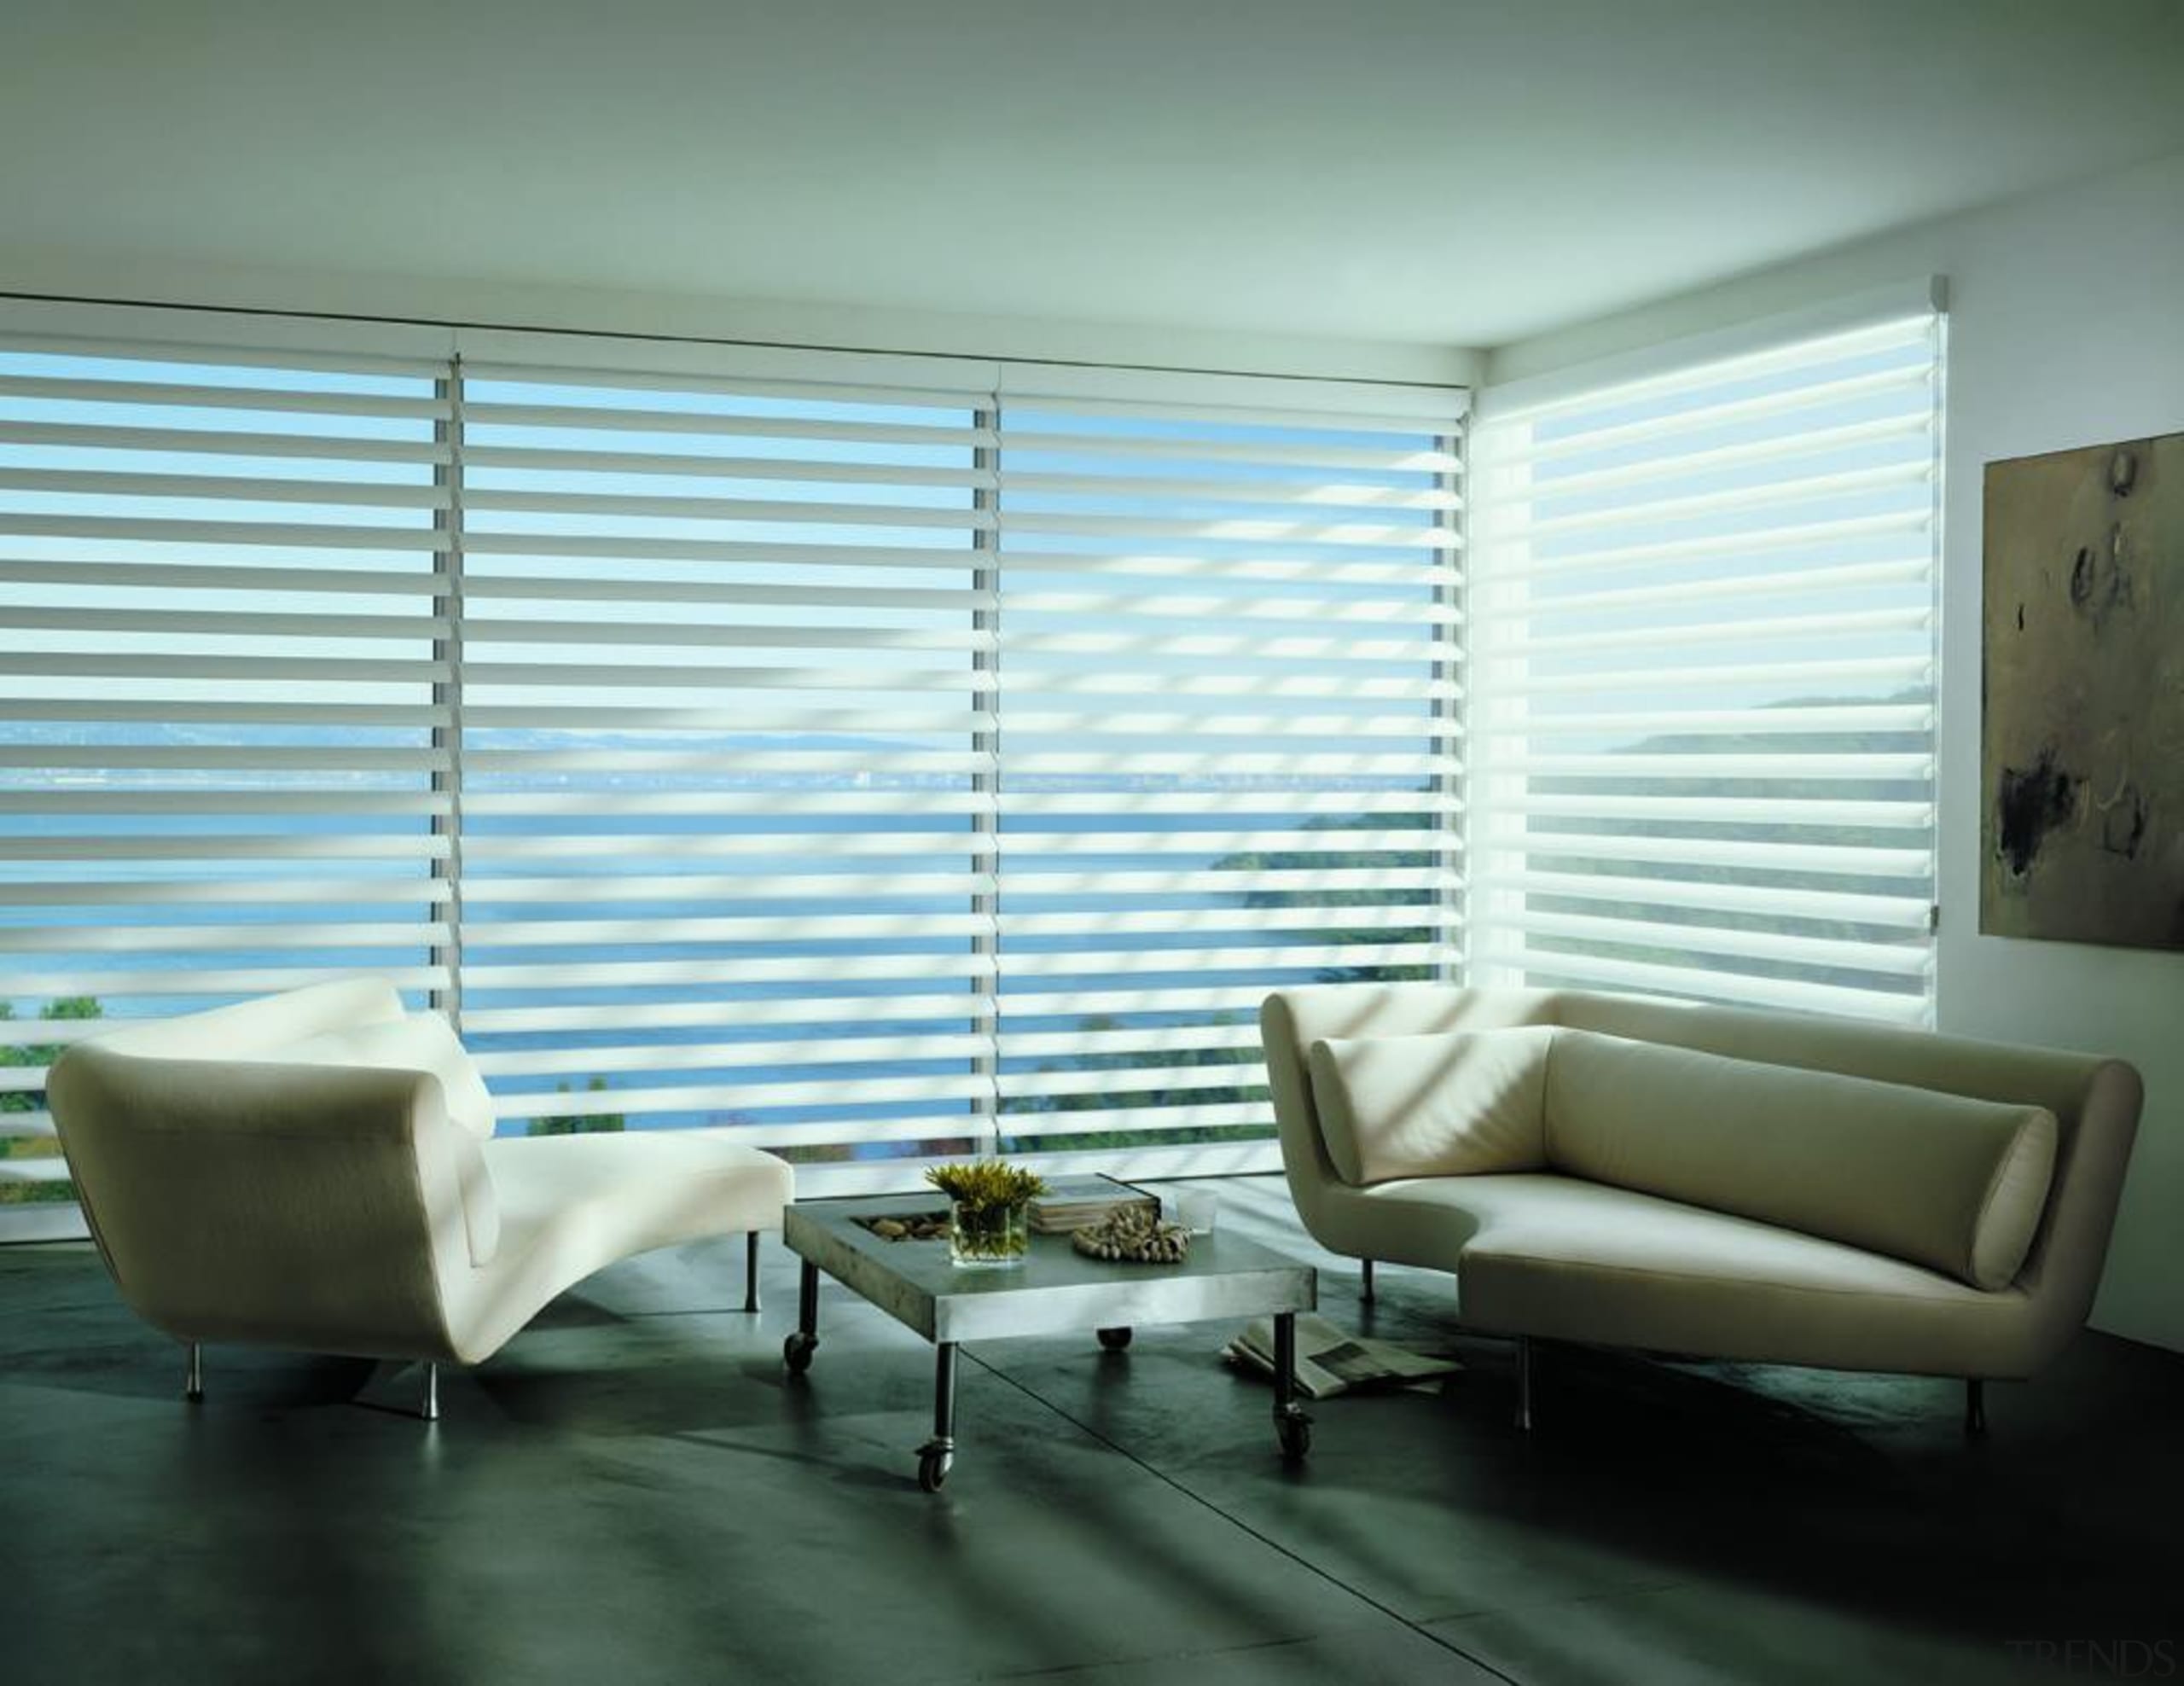 luxaflex pirouette shadings - luxaflex pirouette shadings - ceiling, curtain, daylighting, home, interior design, living room, shade, window, window blind, window covering, window treatment, wood, white, gray